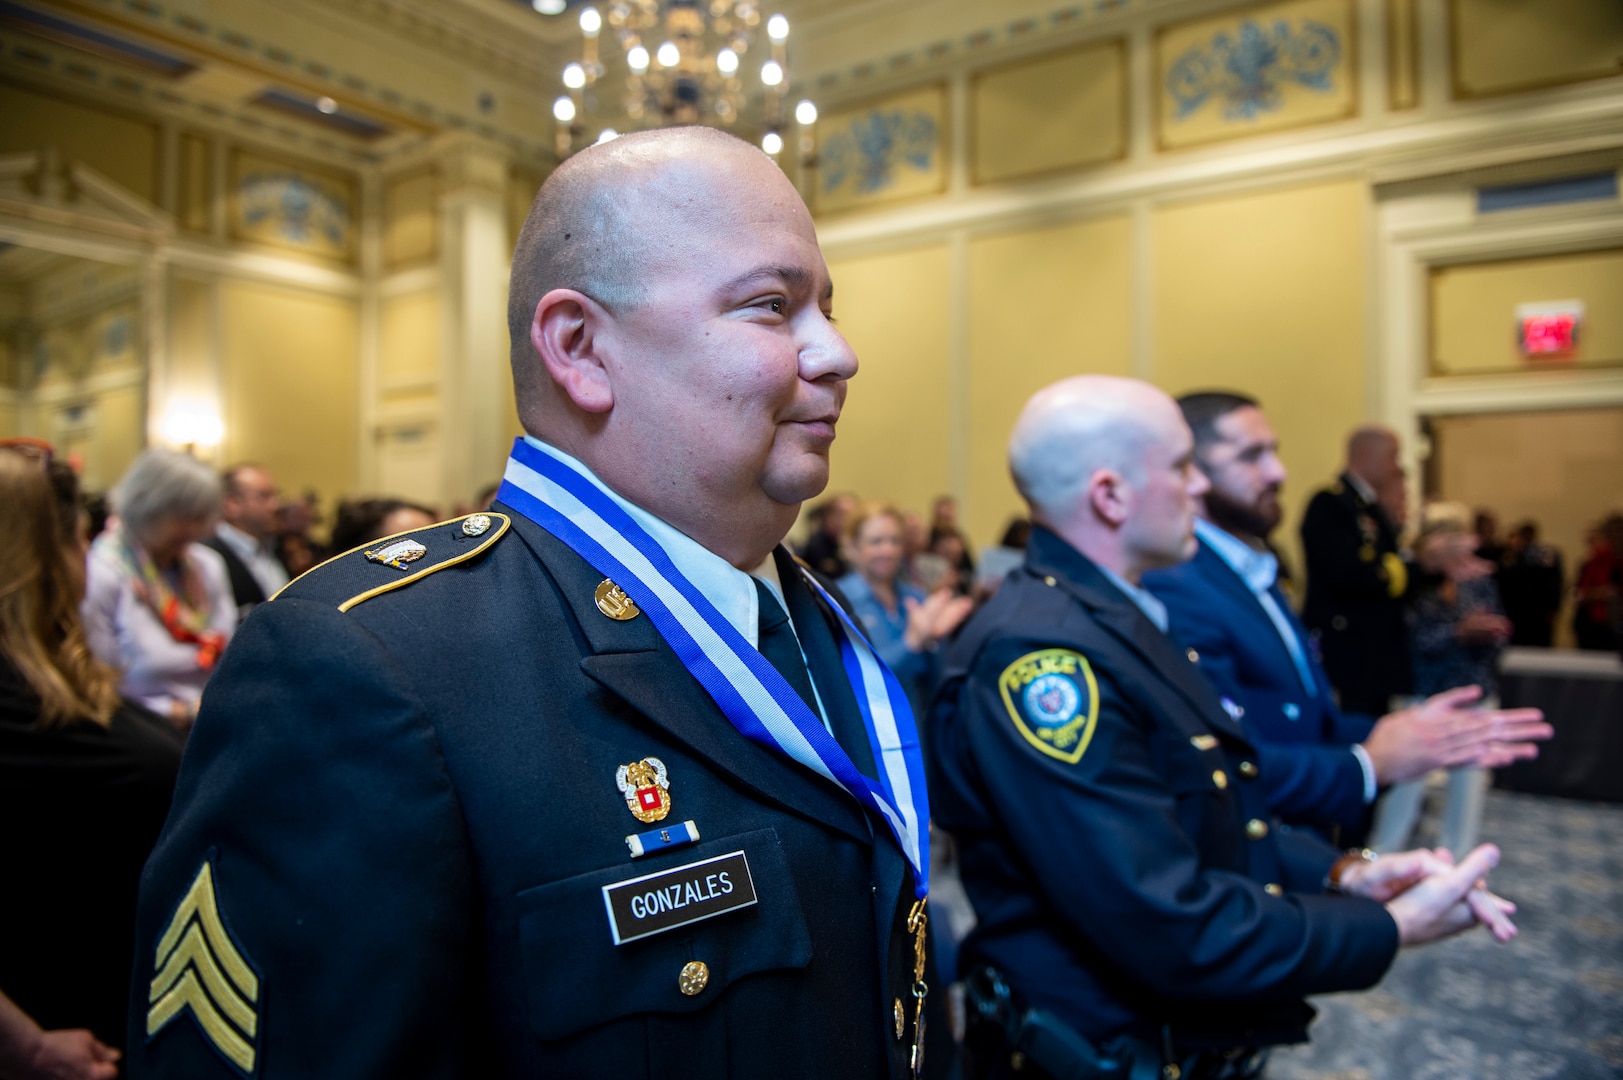 Oklahoma Army National Guard Sgt. Pedro Gonzales III stands with Oklahoma City Police Department Officer Zachary Barby and Tulsa Police Department Officer Aurash Zarkashan during an awards ceremony at the Oklahoma State Capitol in Oklahoma City, May 18, 2021. Oklahoma Governor Kevin Stitt presented Gonzales with the inaugural Oklahoma Medal of Valor, the state of Oklahoma’s highest award of honor presented to a member of a public safety agency or the public for heroic acts. (Oklahoma National Guard photo by Anthony Jones)